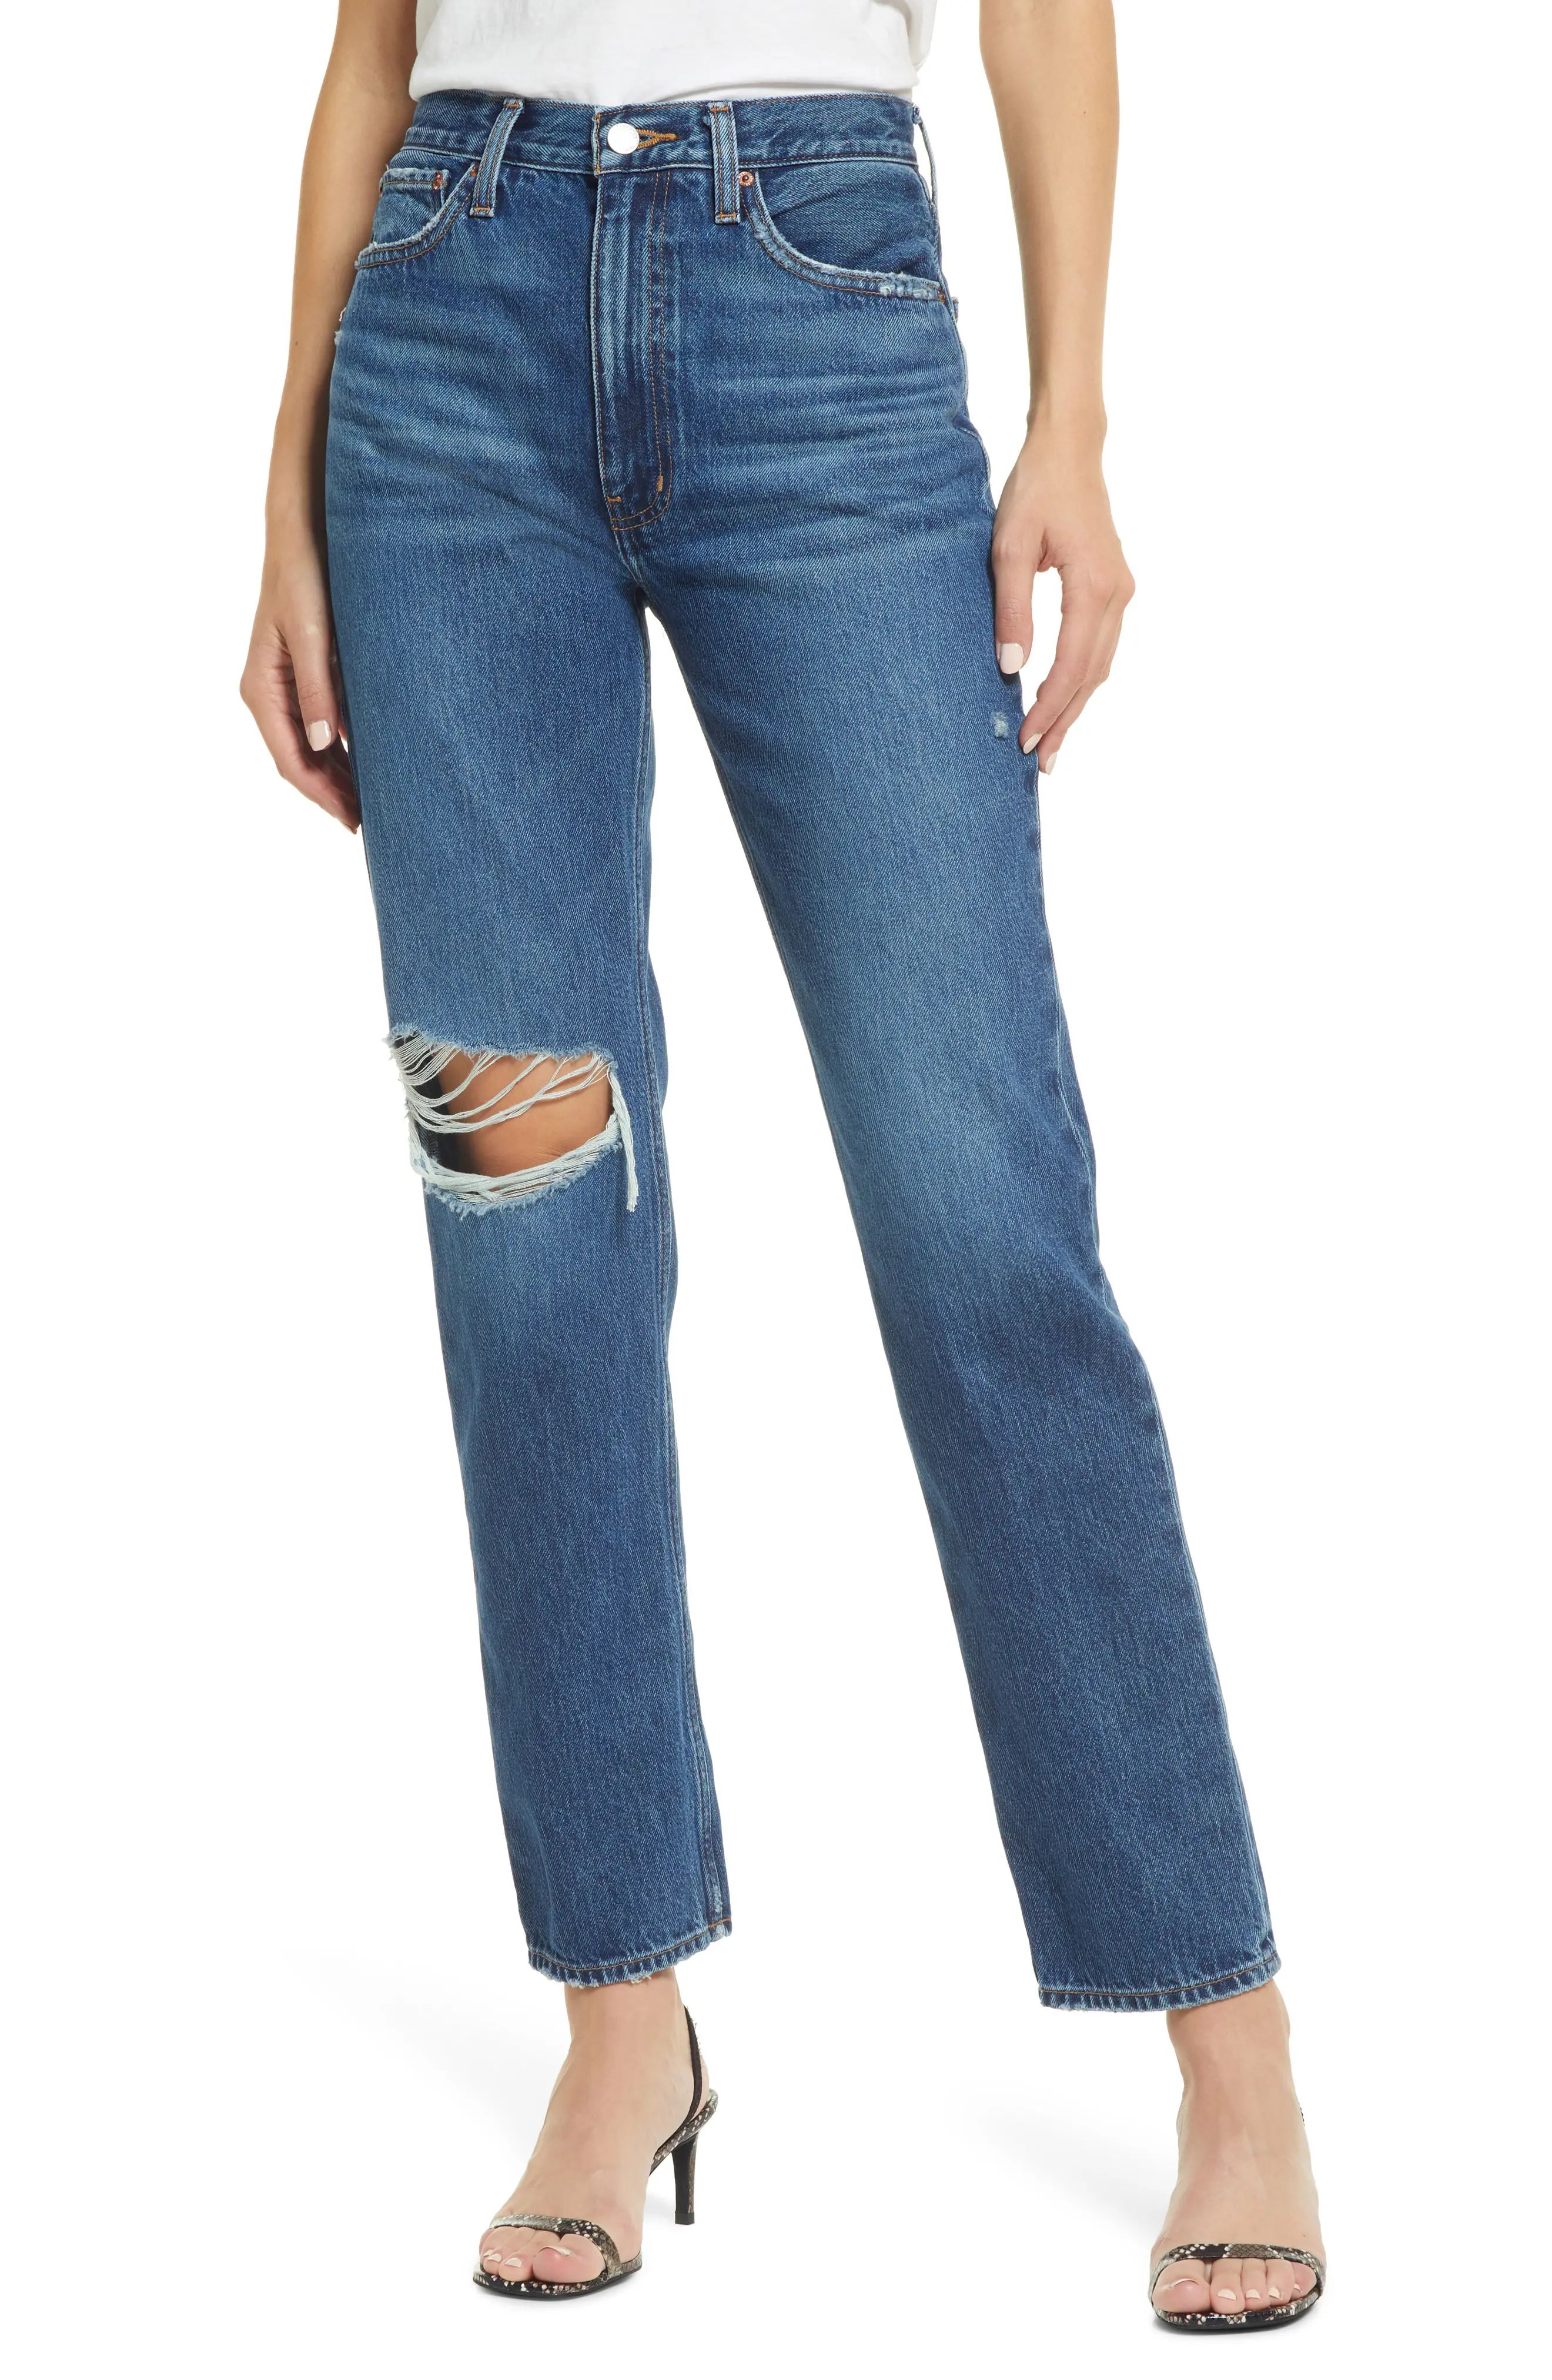 ETICA Finn High Waist Ripped Jeans in Wildwood at Nordstrom, Size 27 | Nordstrom